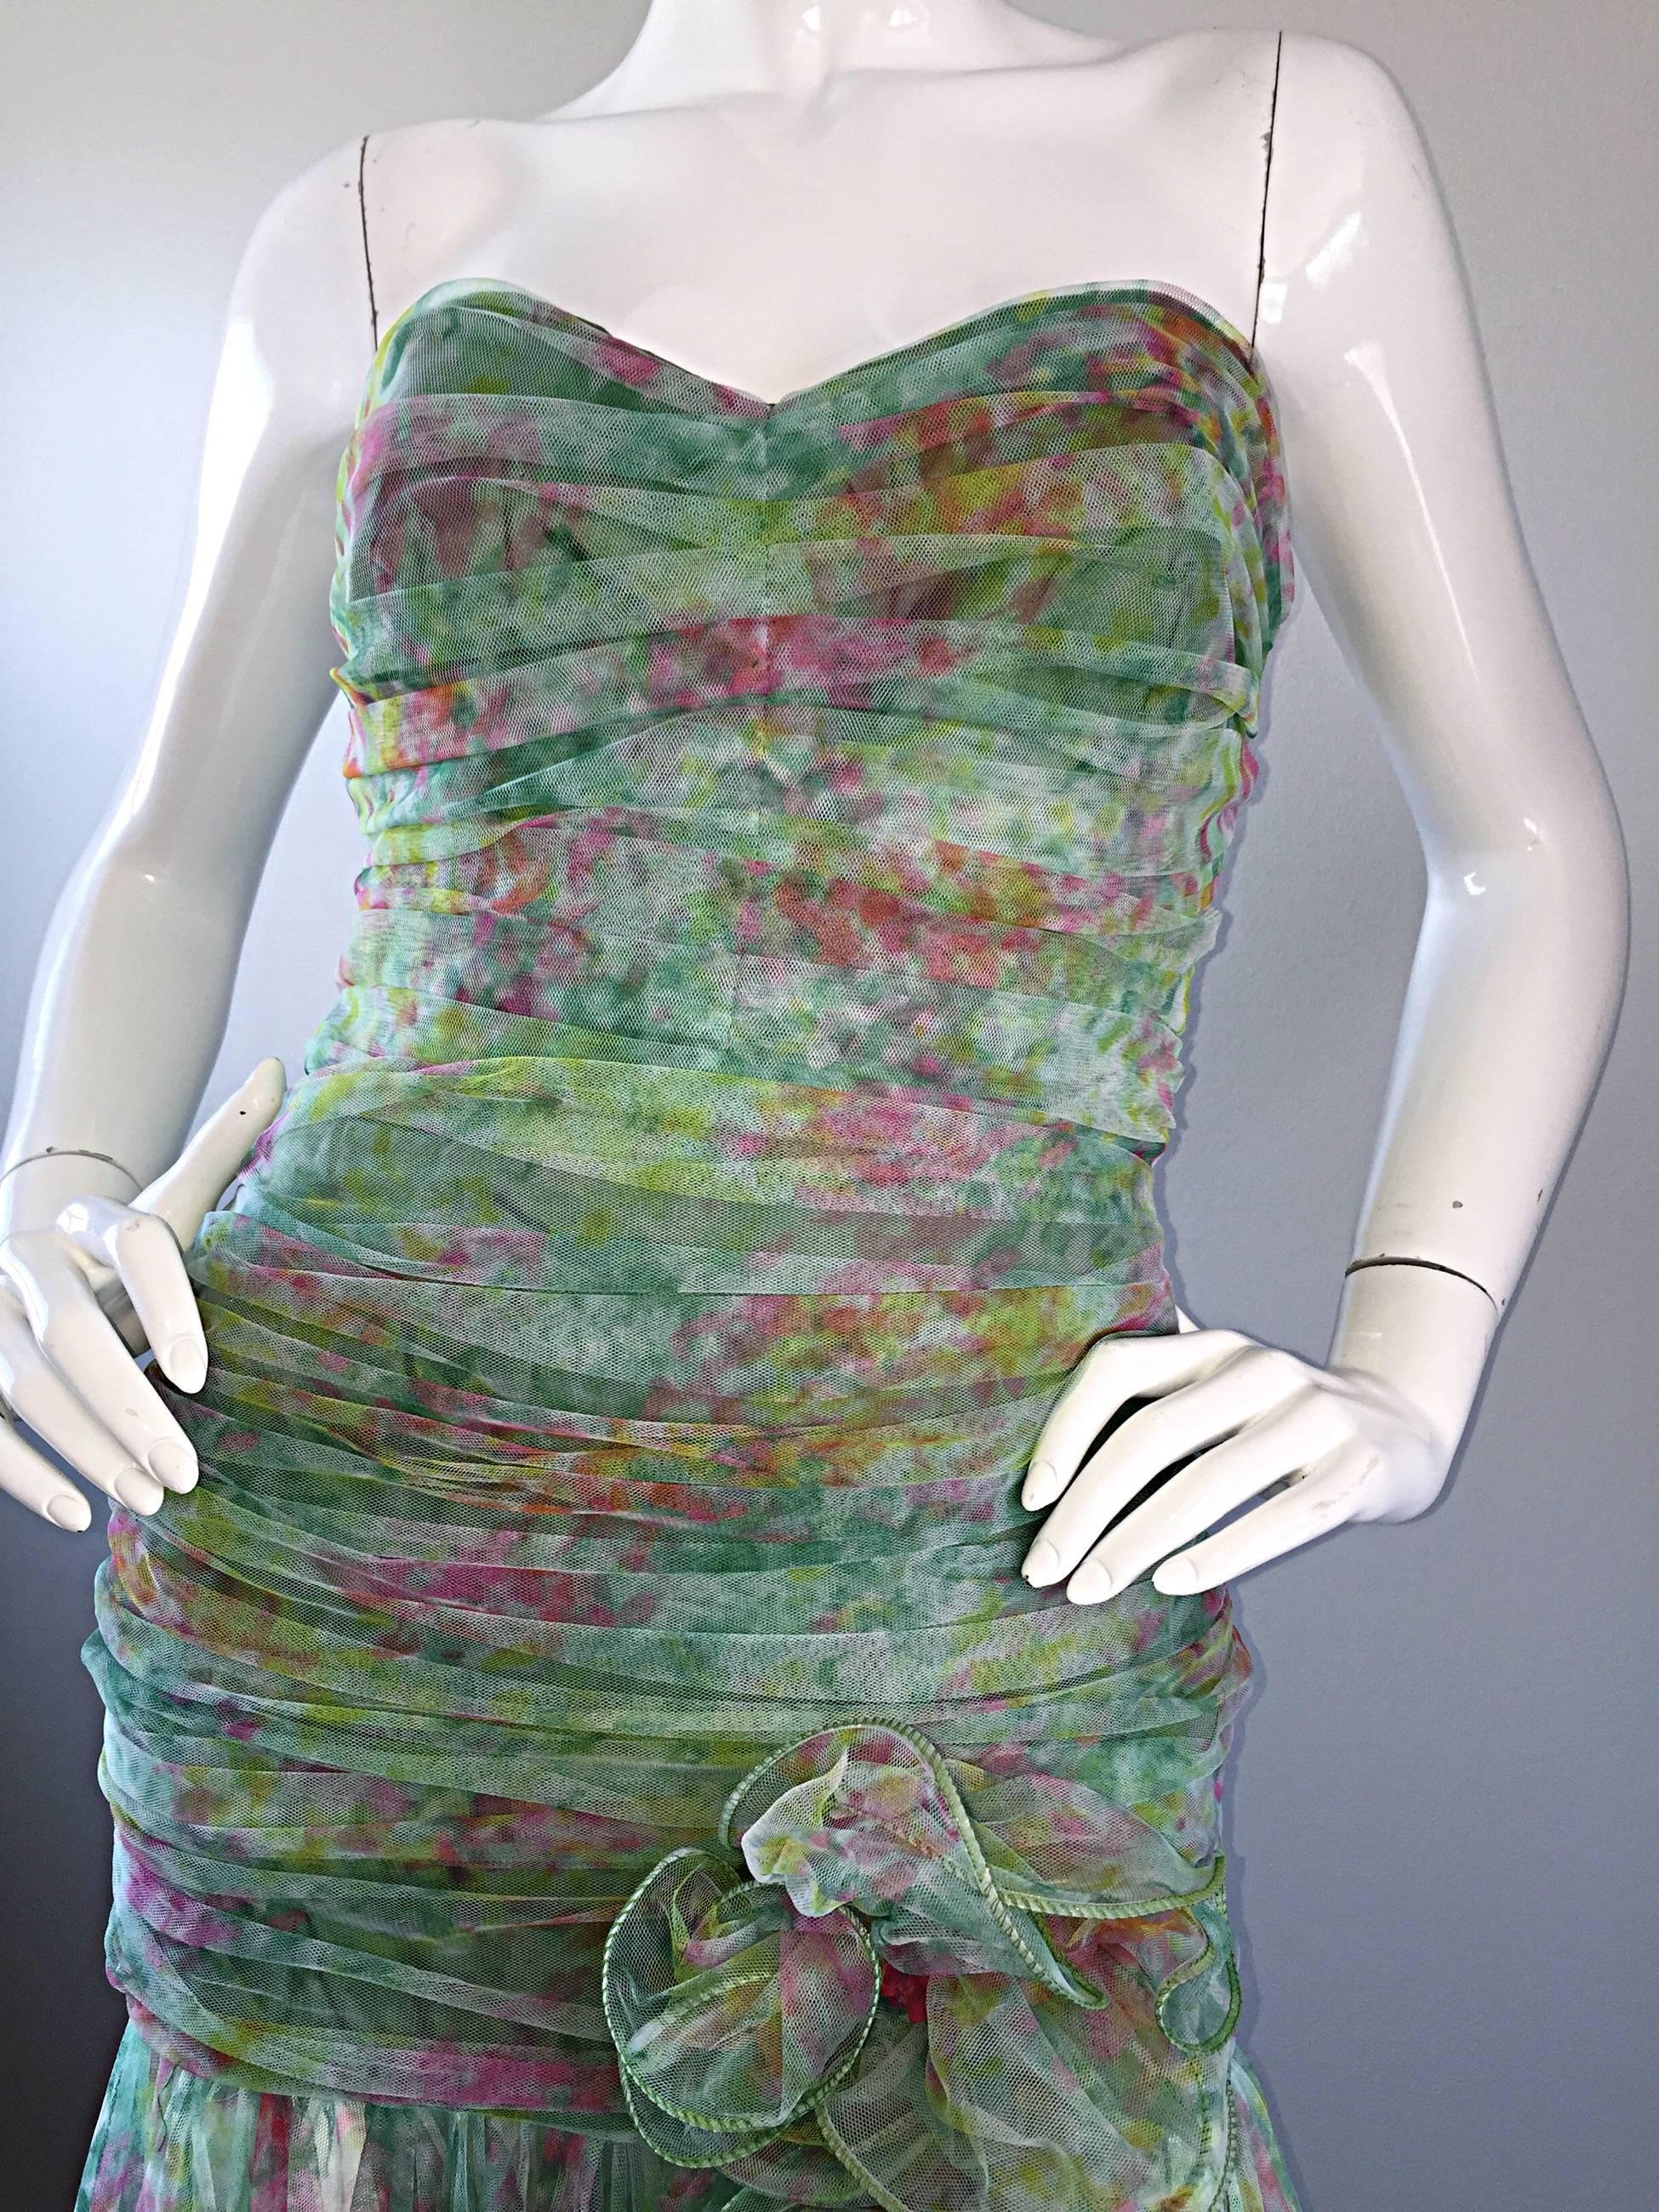 Breathtaking Vintage Jean Jacques Bertrand Couture Strapless Watercolor Gown 1